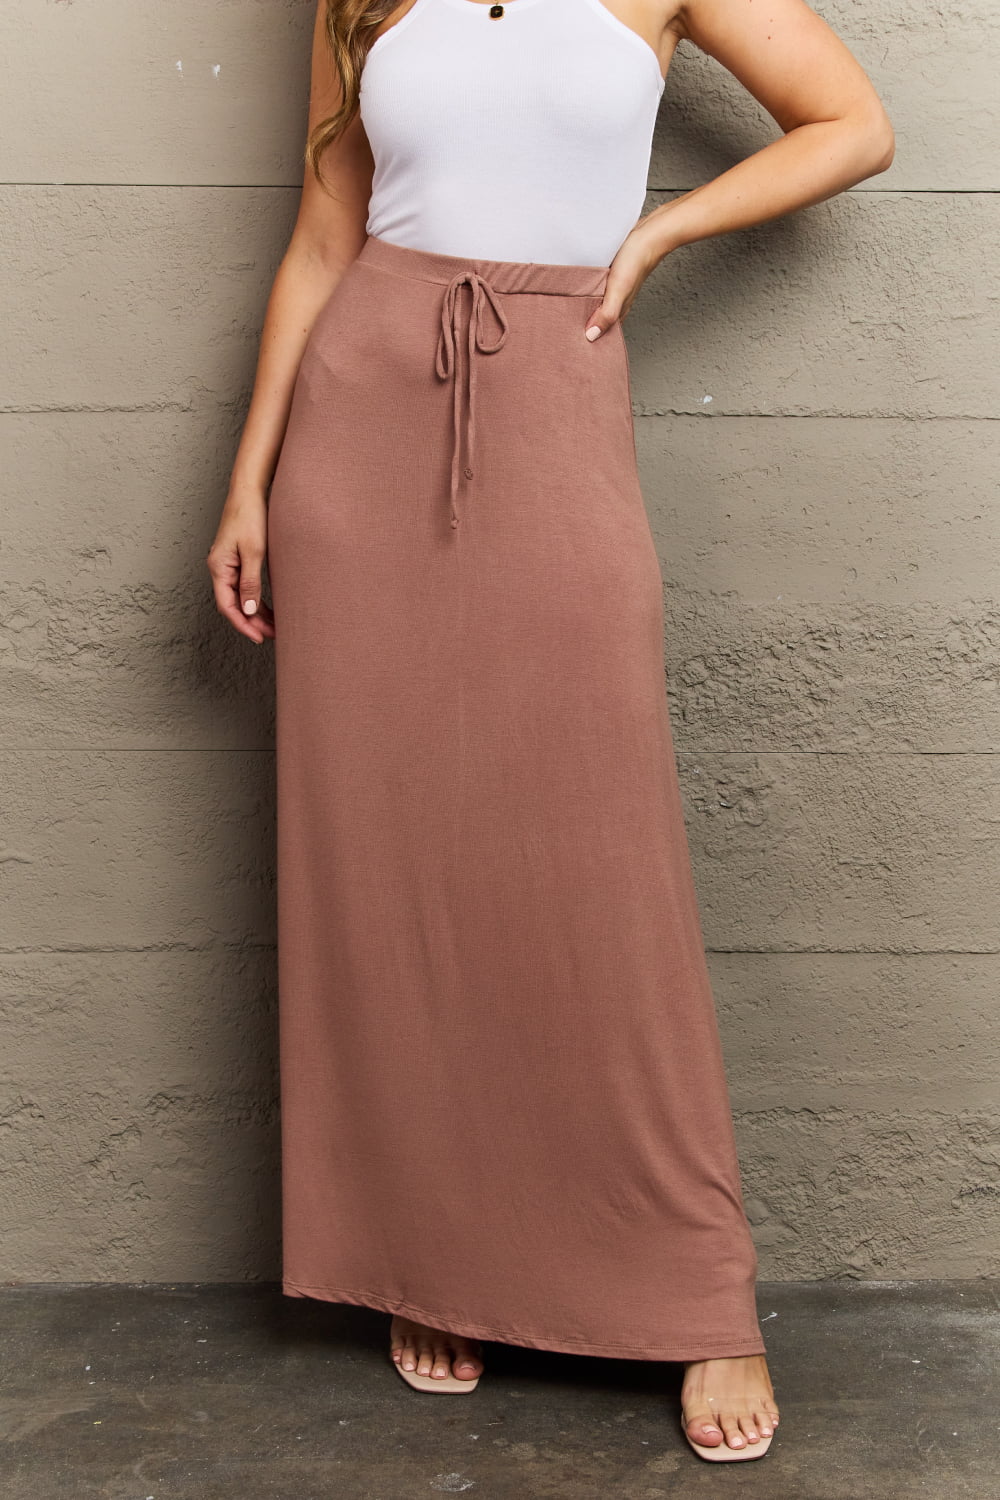 For The Day Maxi Skirt in Chocolate